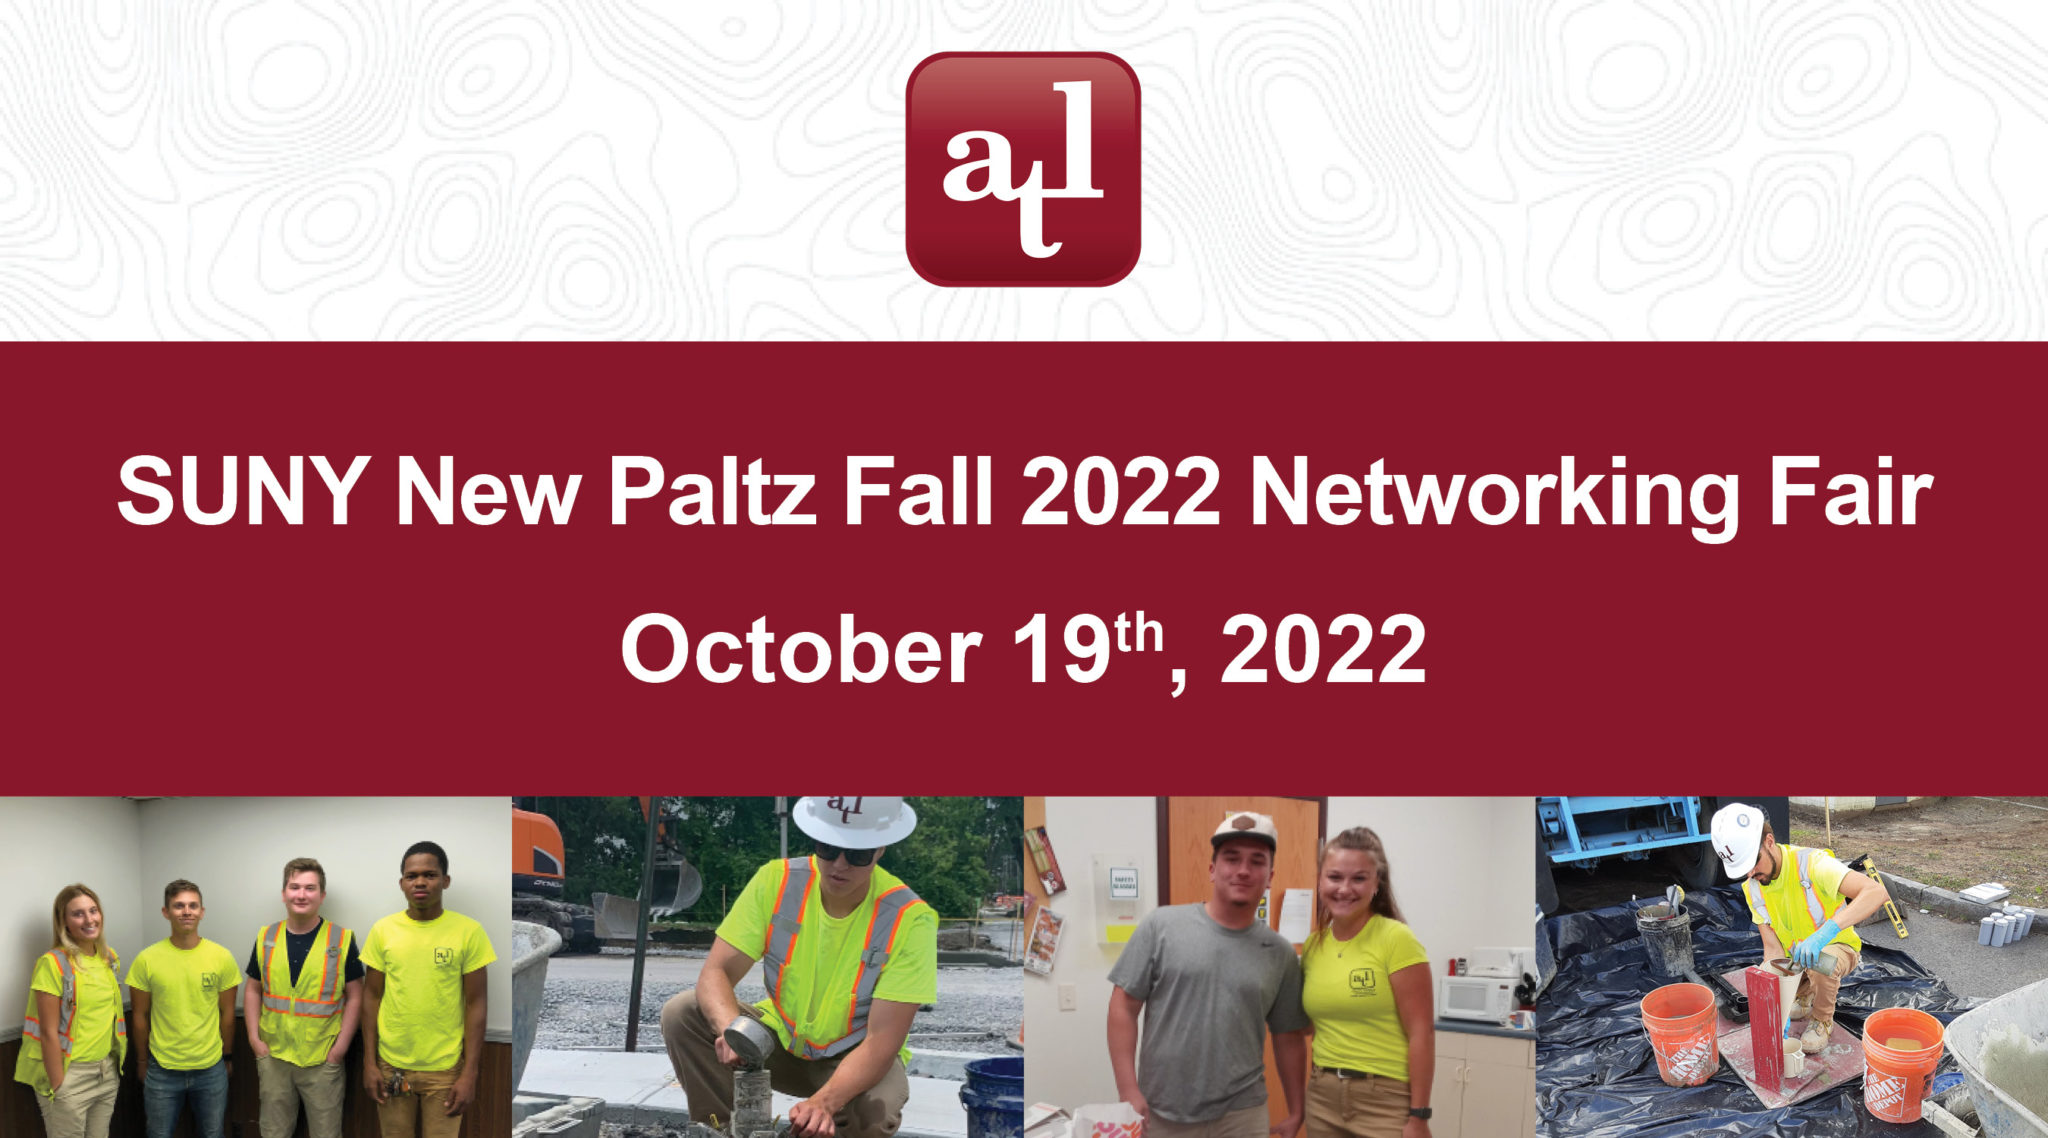 atl-is-attending-the-suny-new-paltz-fall-2022-networking-fair-for-jobs-and-internships-october